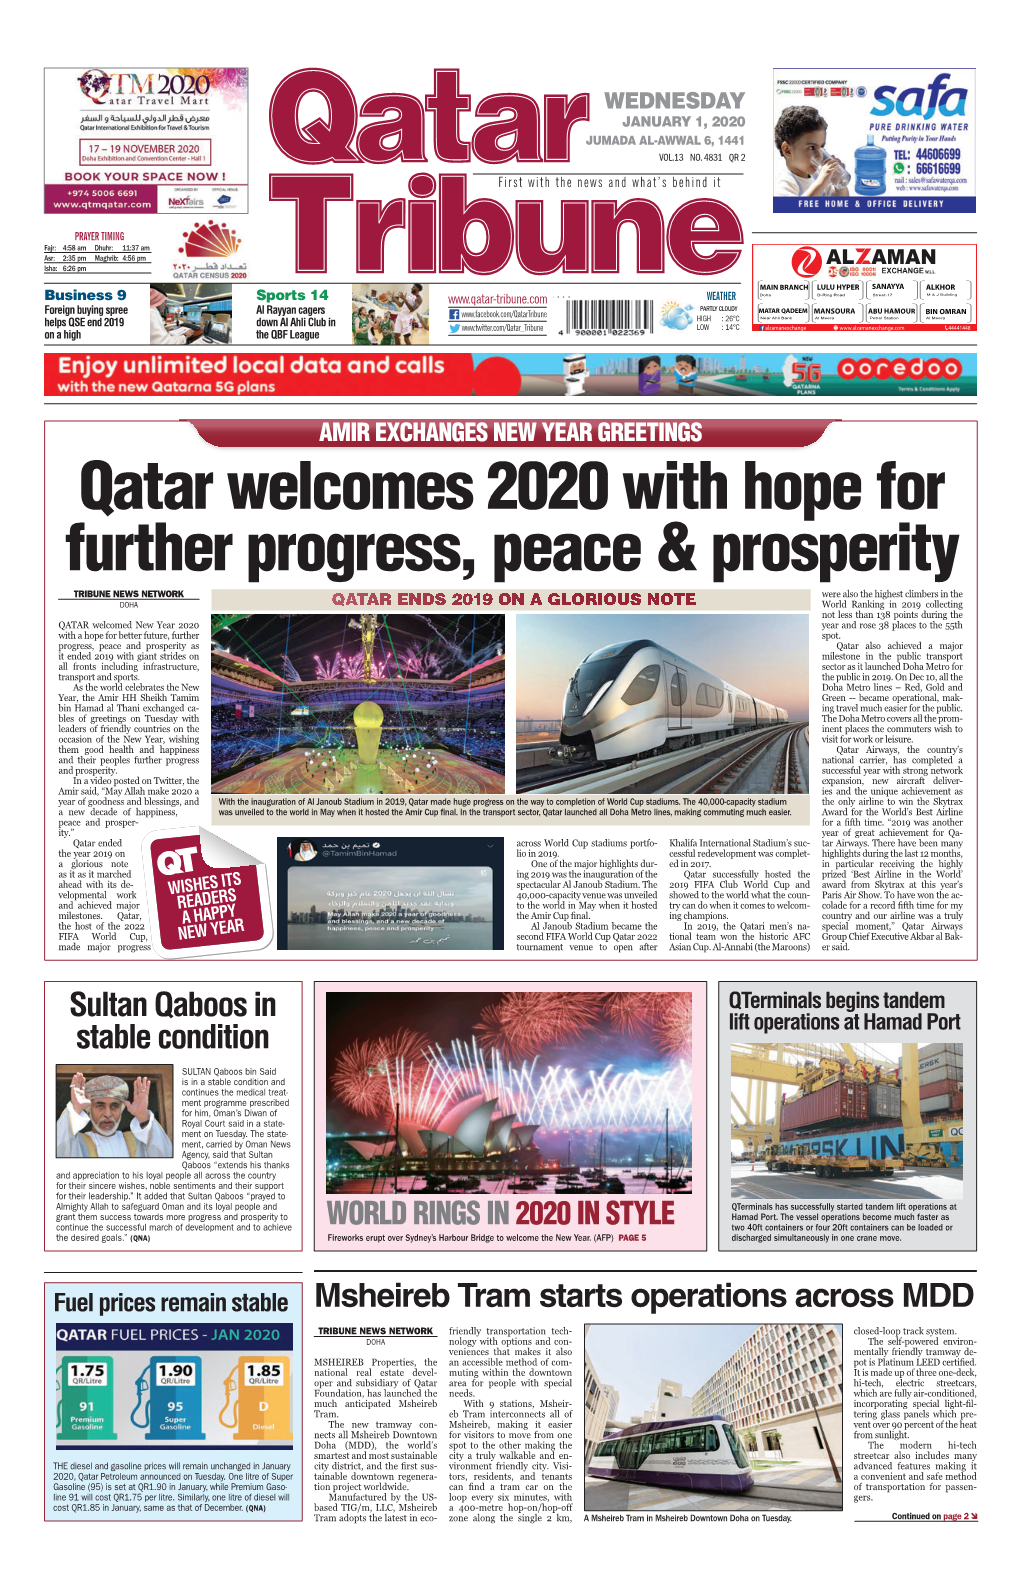 Qatar Welcomes 2020 with Hope for Further Progress, Peace & Prosperity